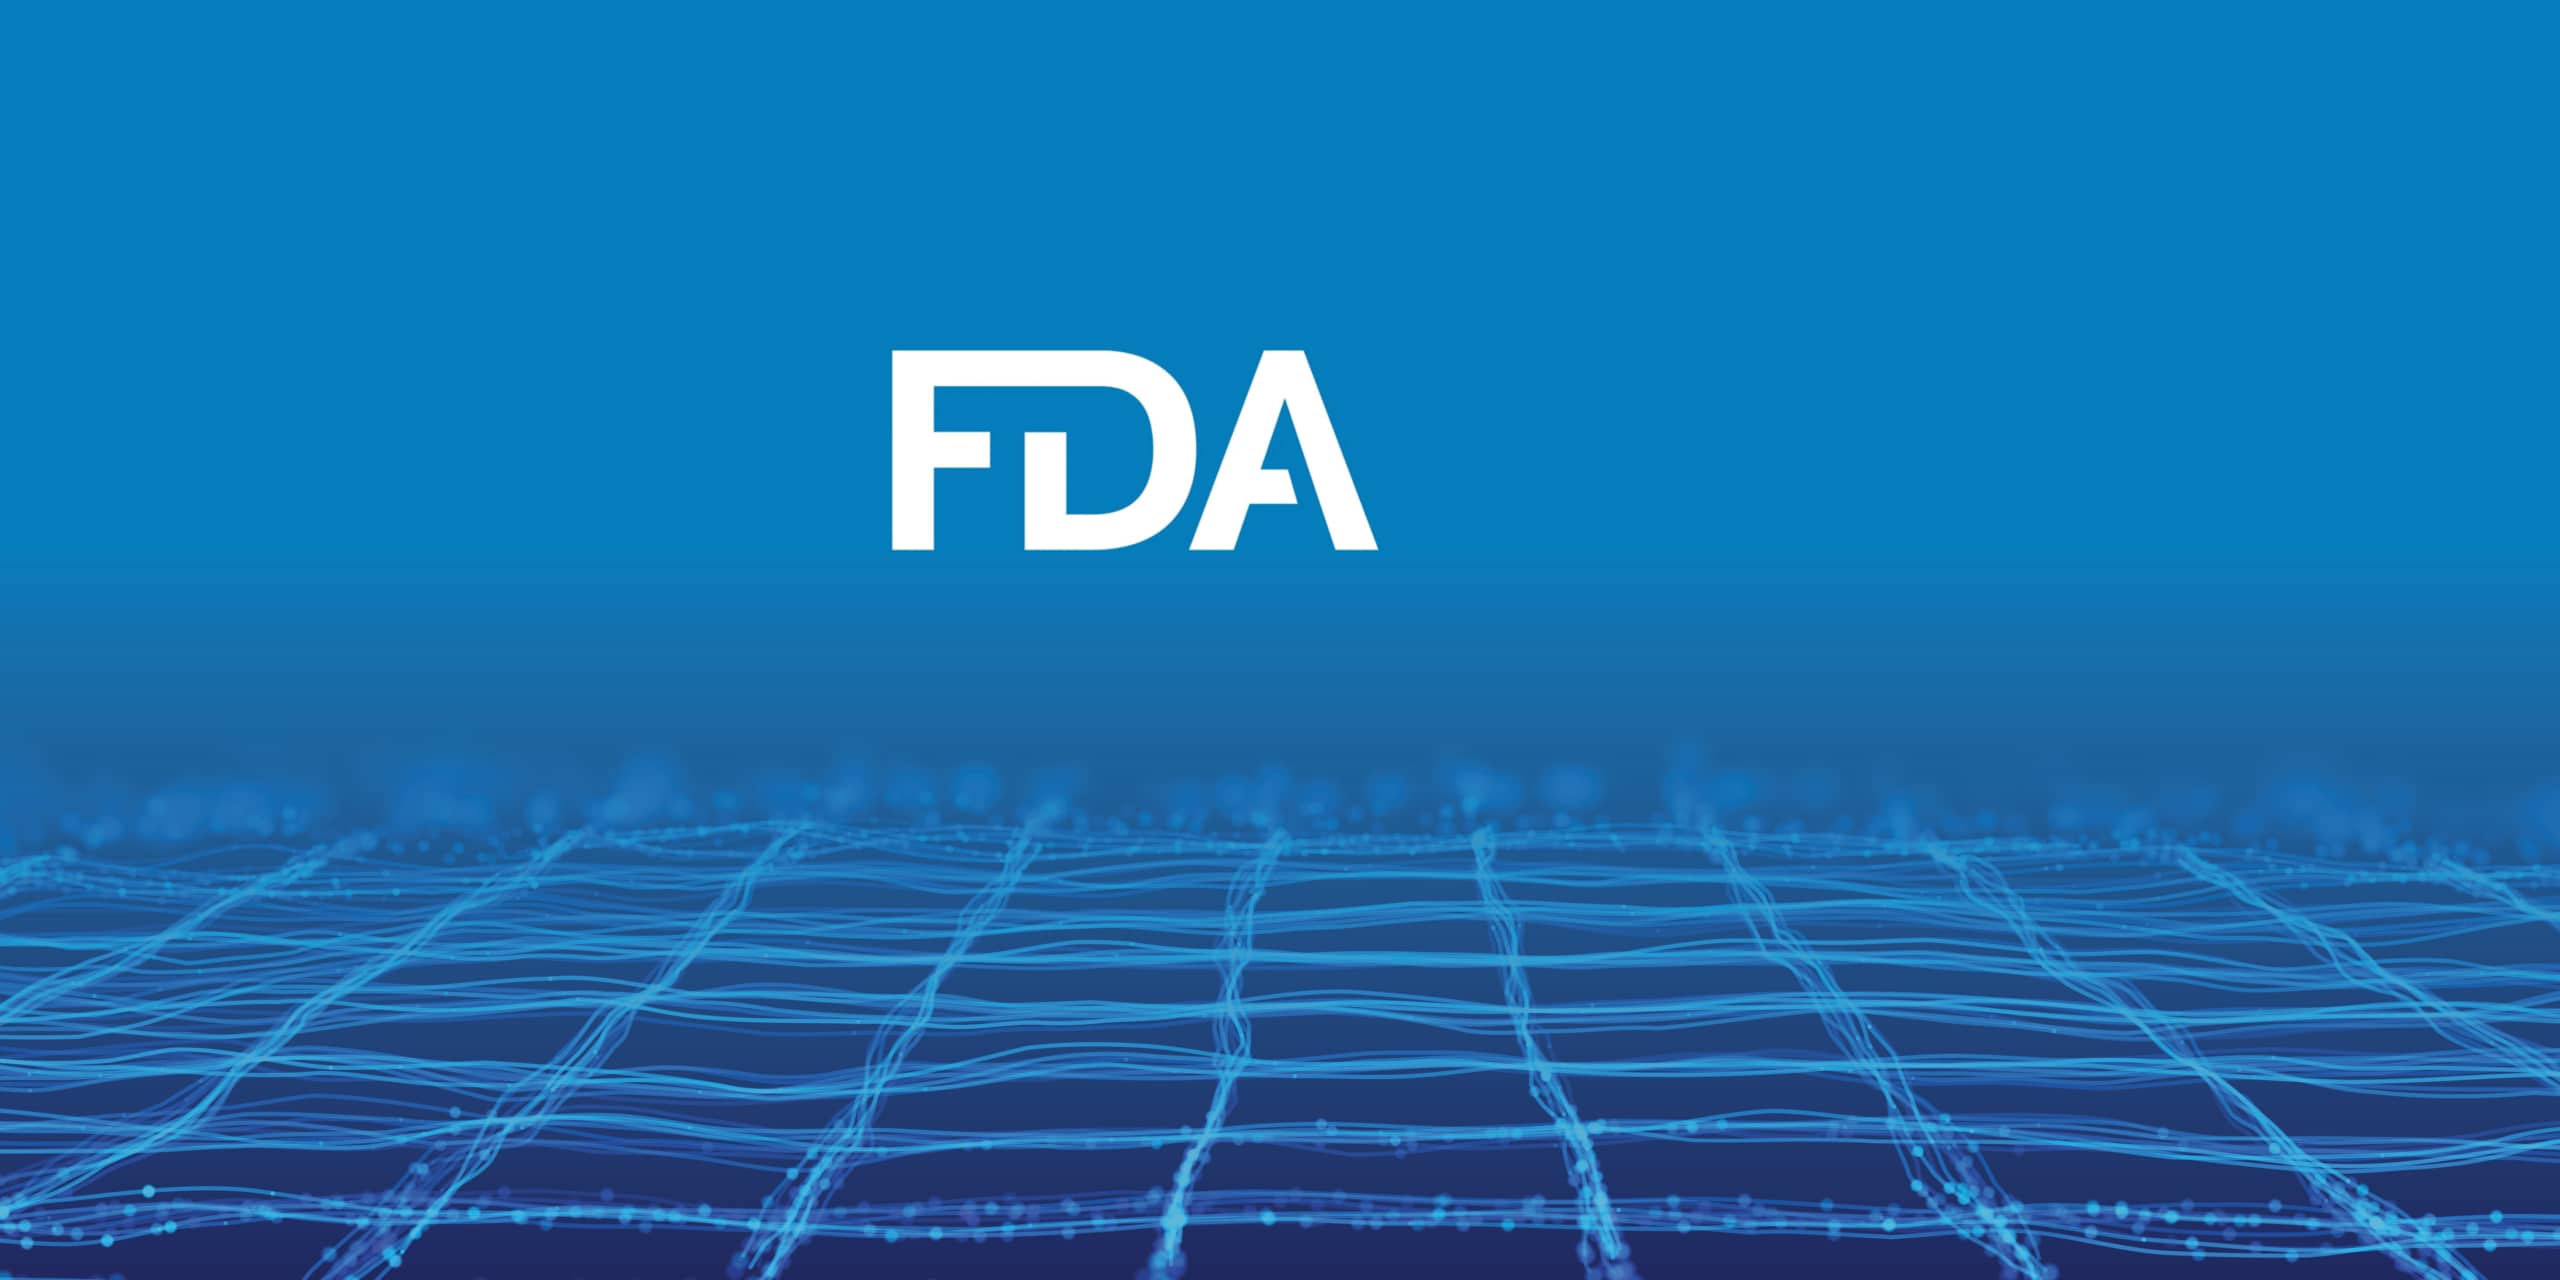 FDA logo with blue and white checkered background